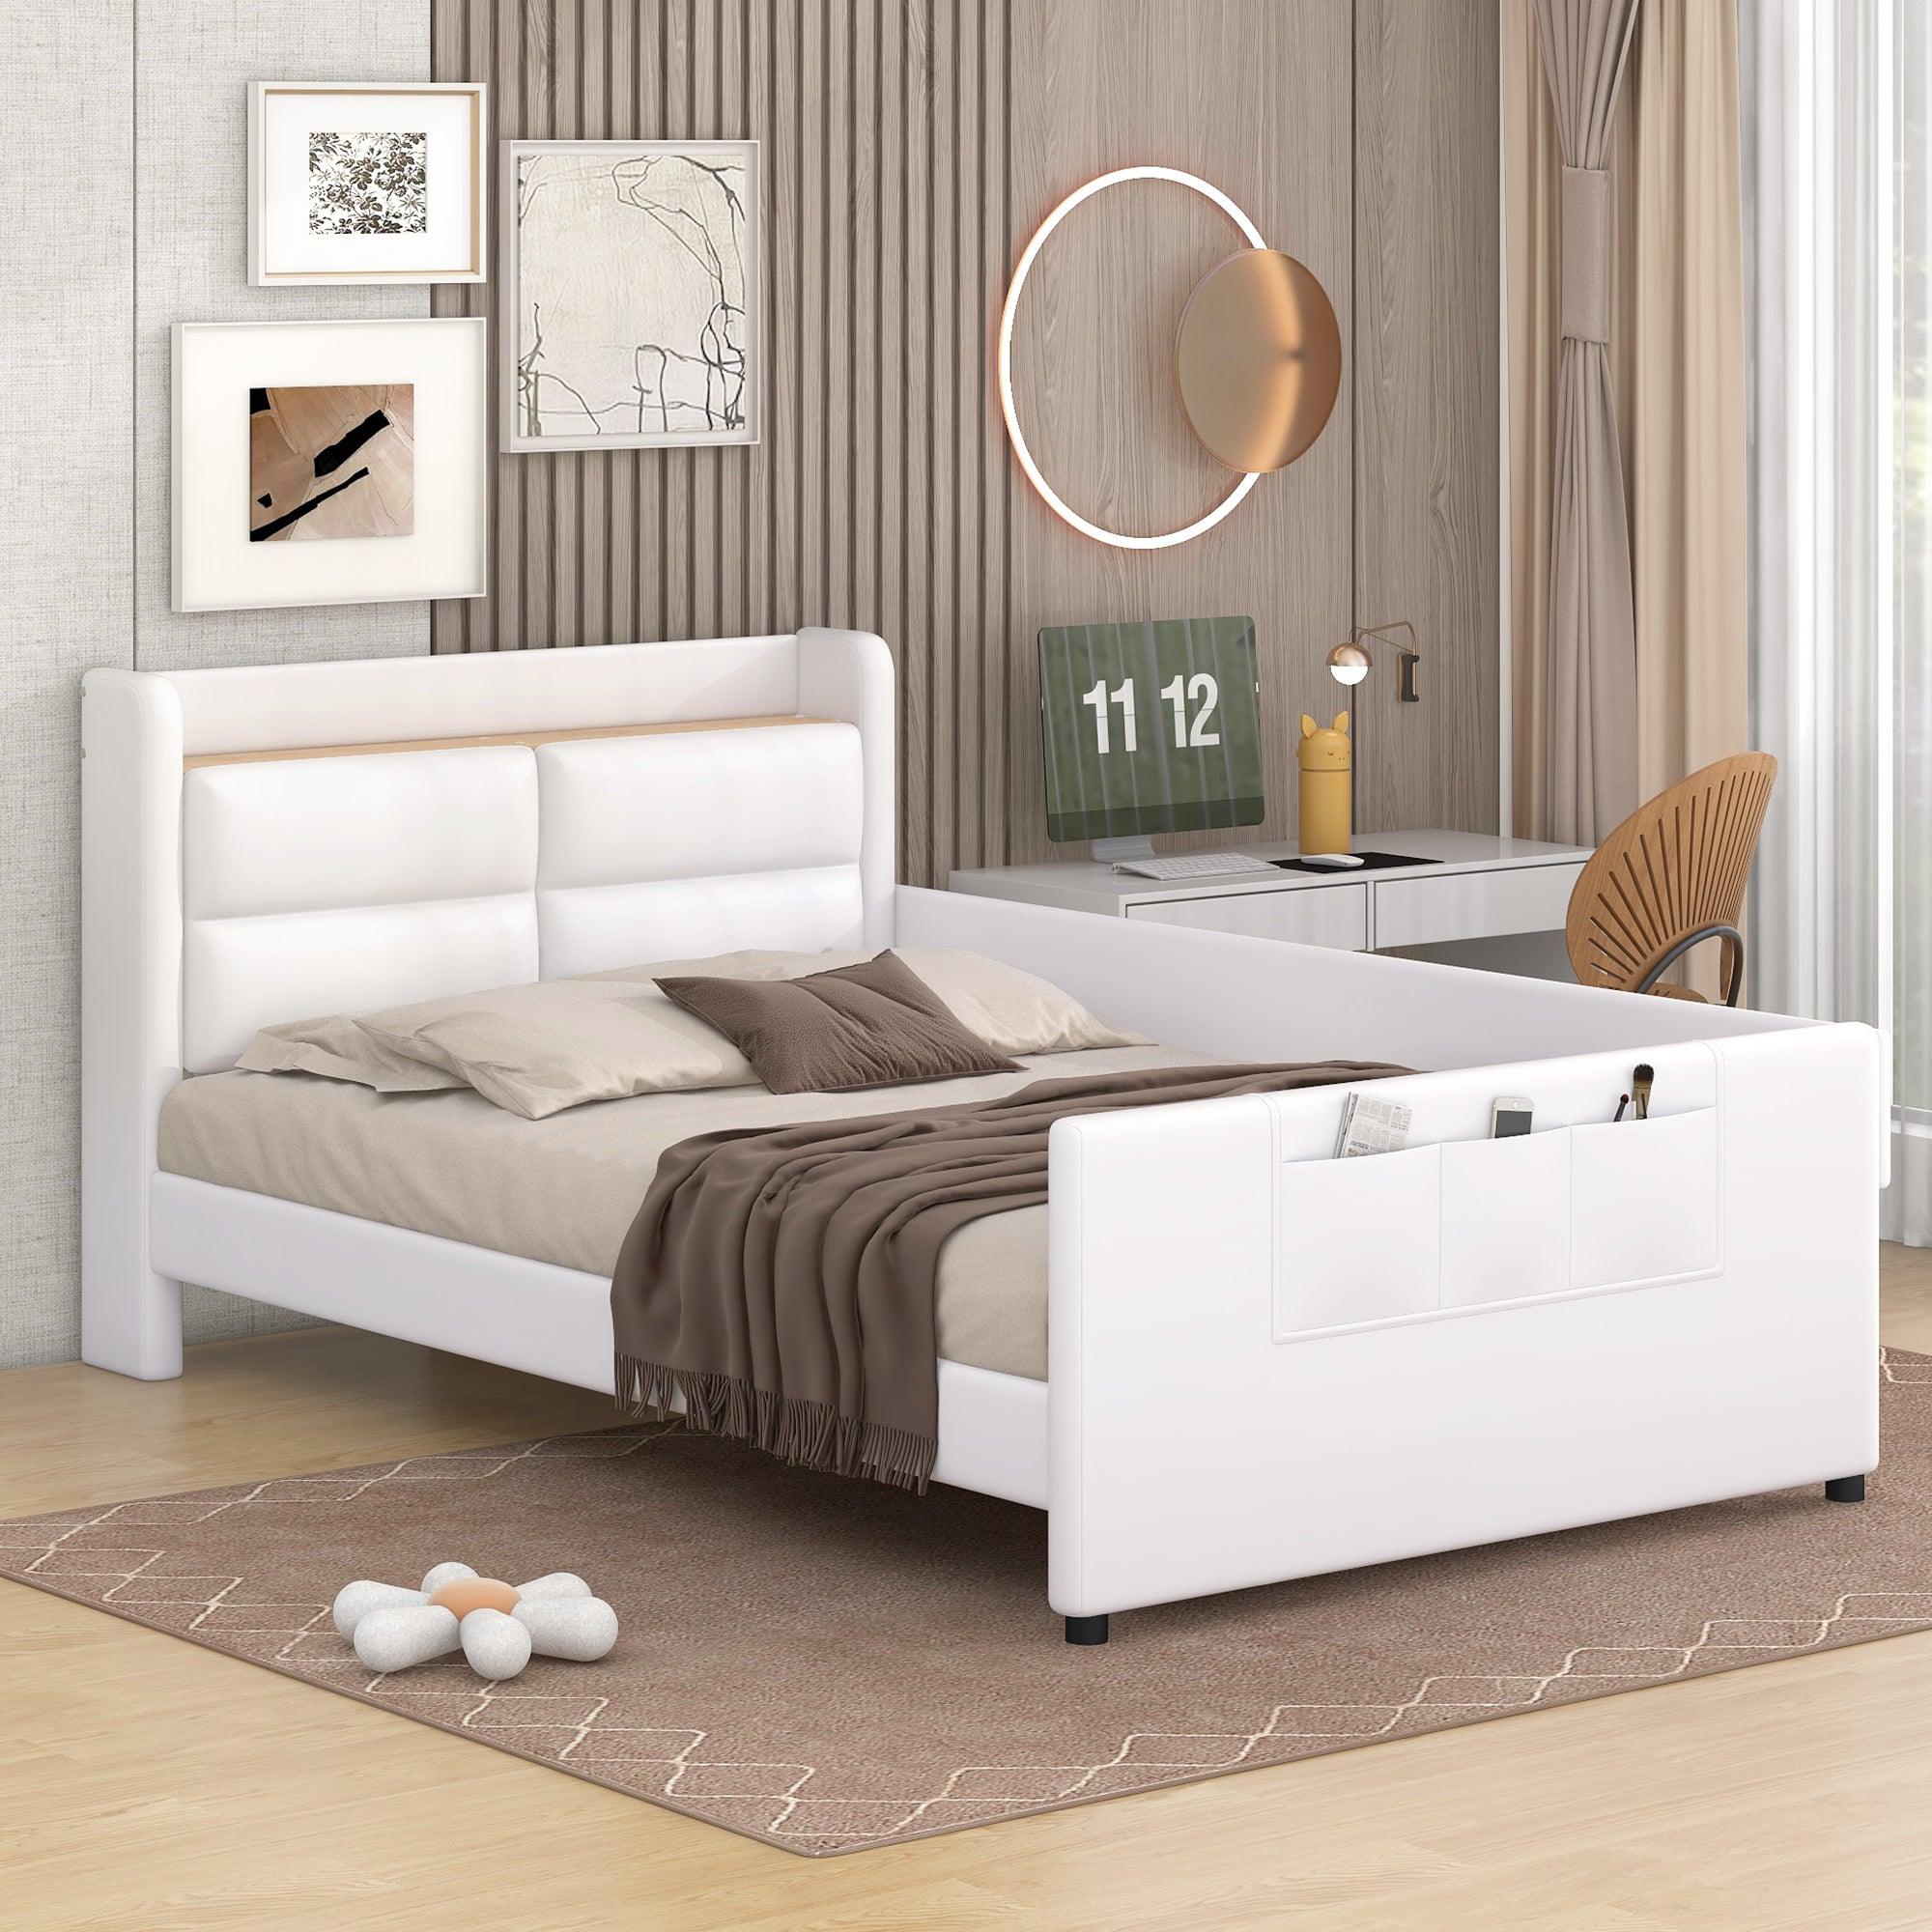 🆓🚛 Twin Size Upholstered Platform Bed With Guardrail, Storage Headboard & Footboard, Beige